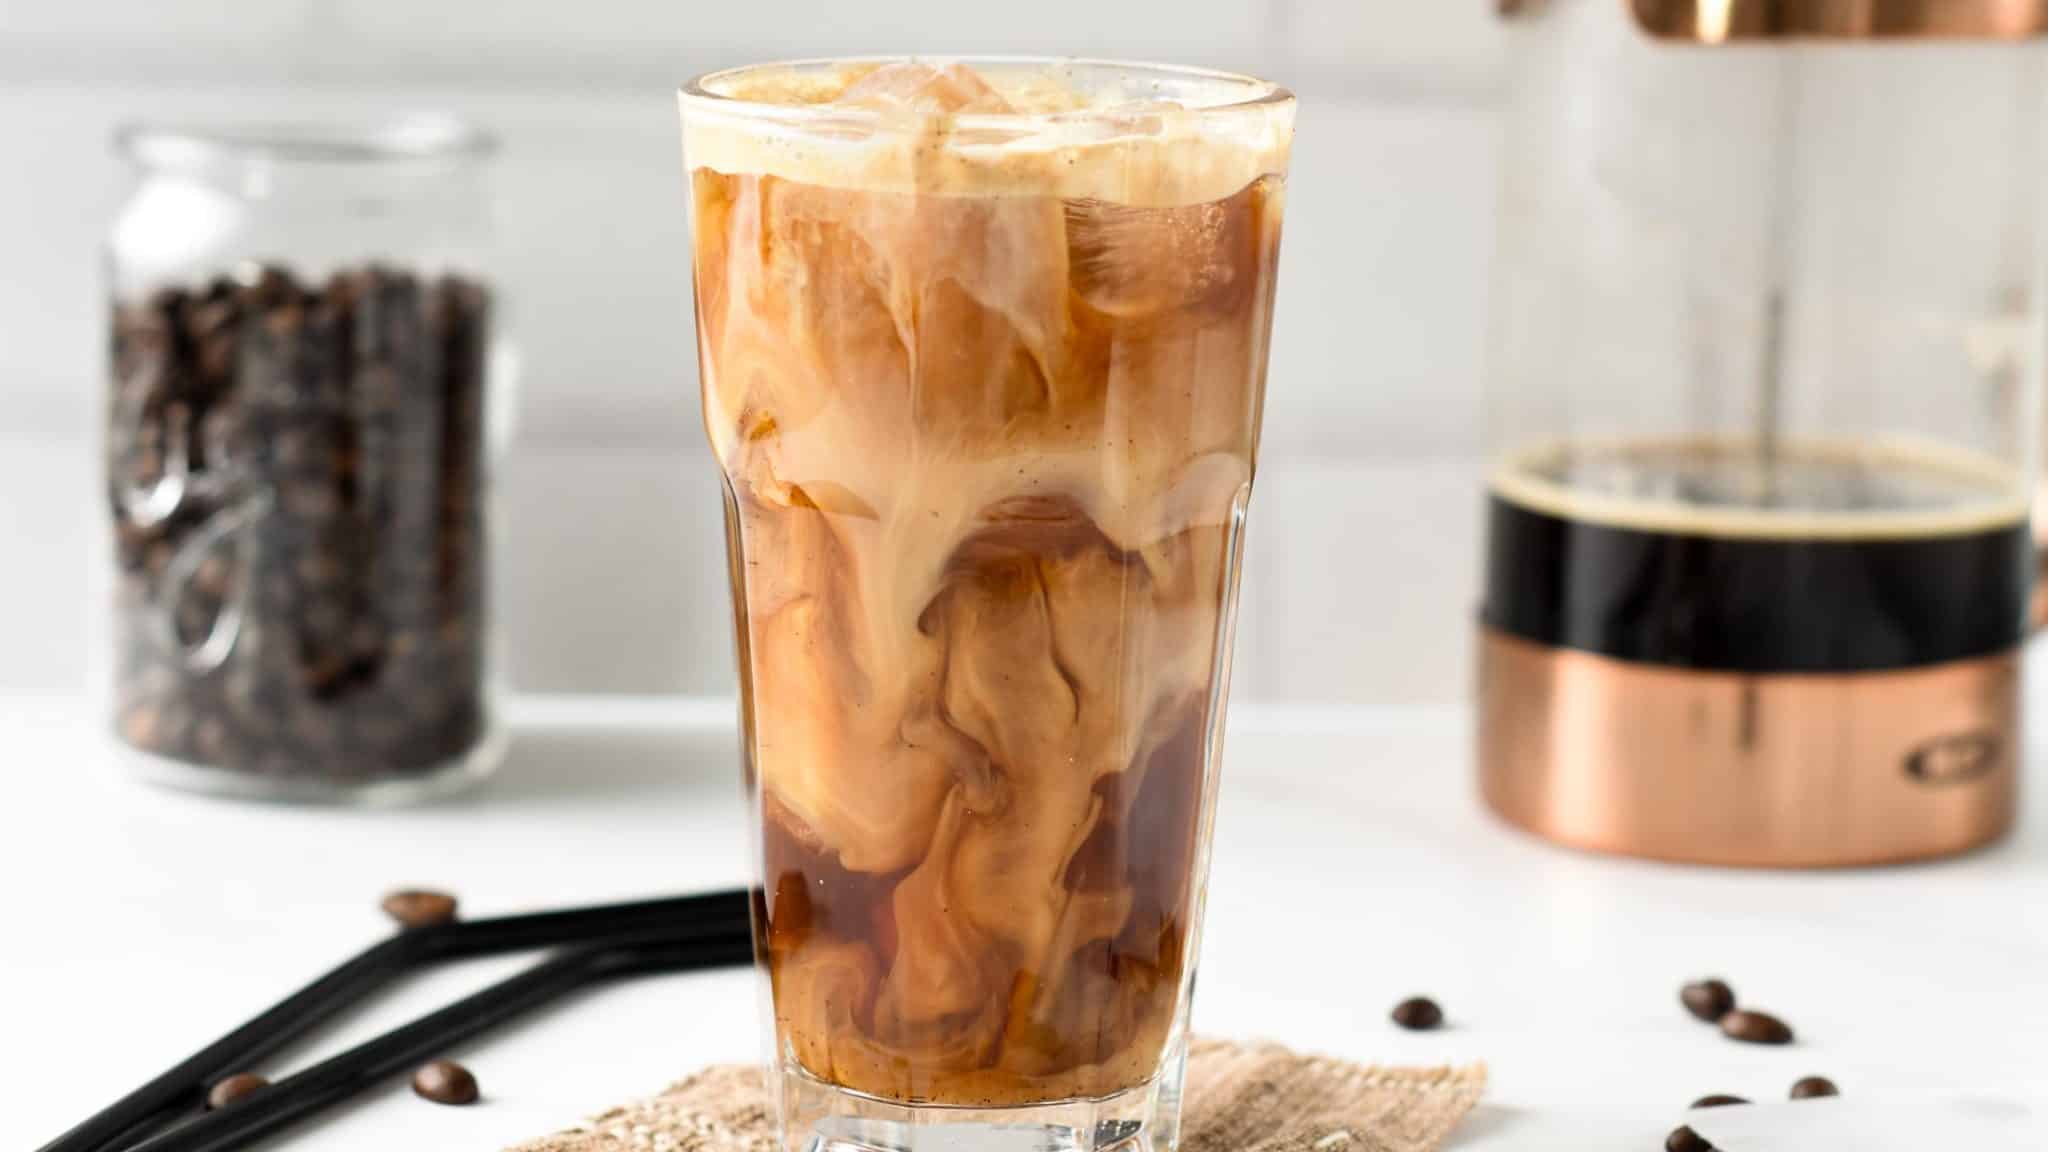 How to make iced coffee with Nespresso